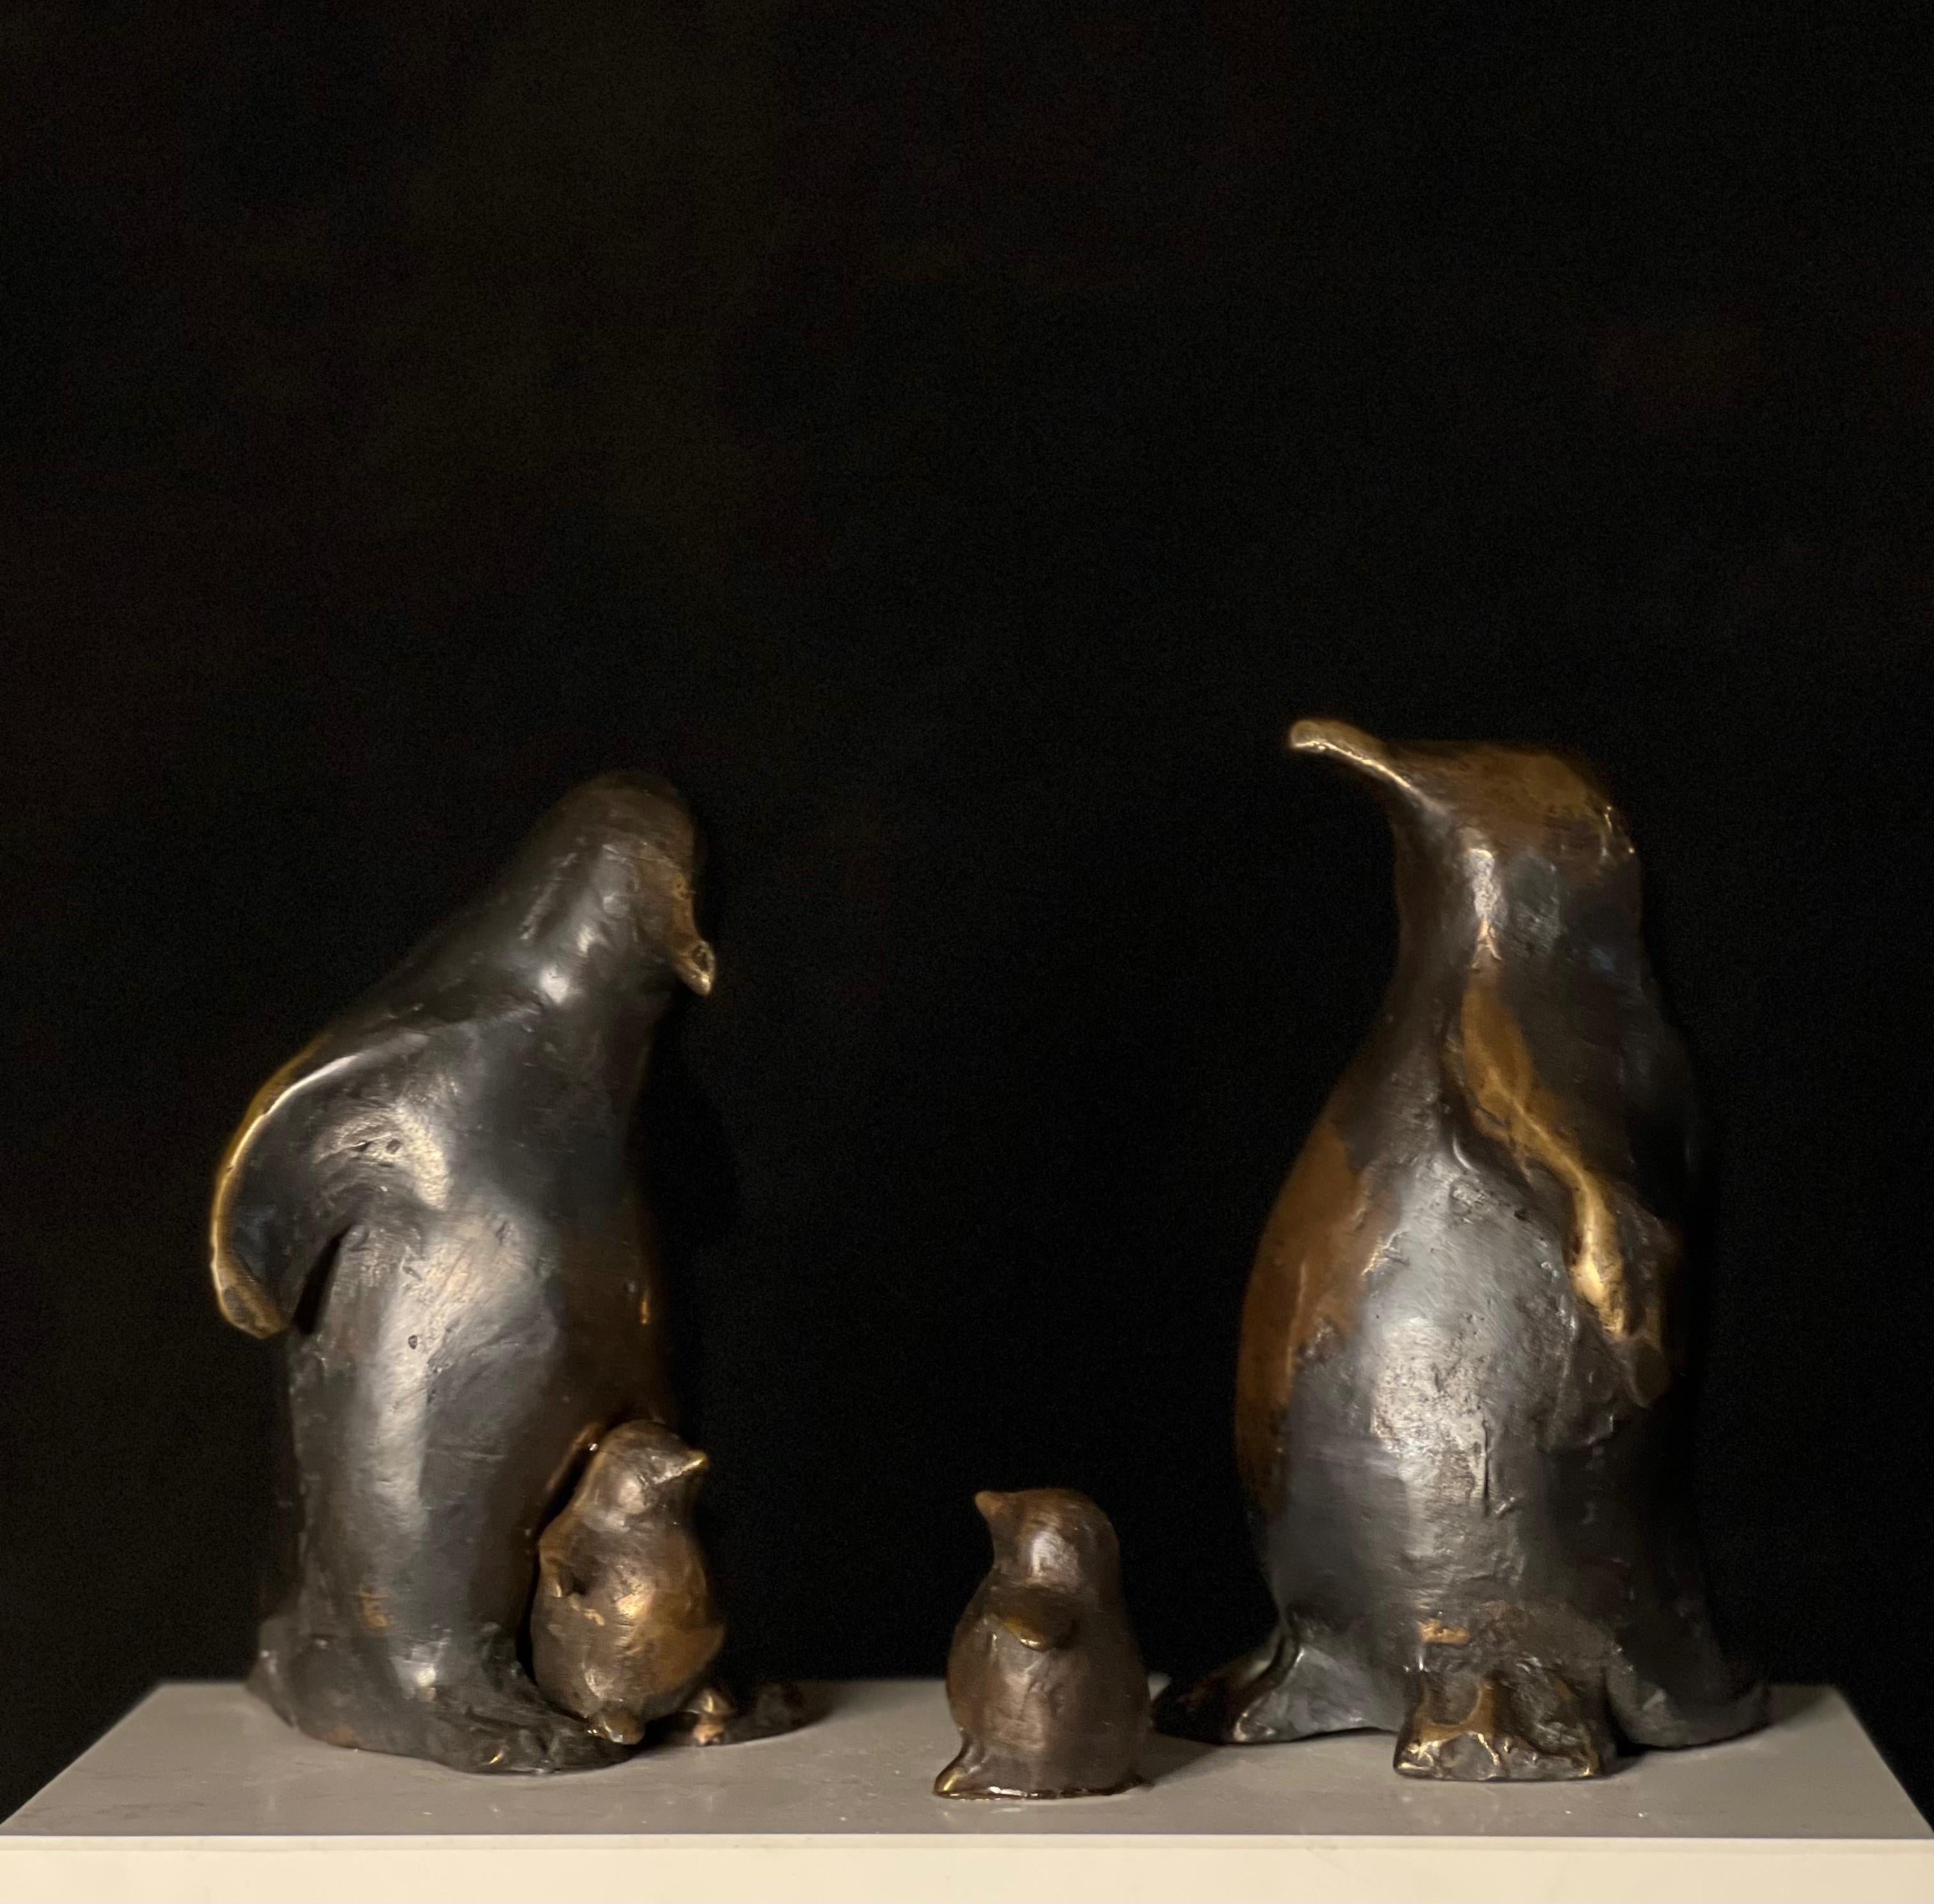 The Penguin family - bronze sculpture  - Sculpture by Tauno Kangro